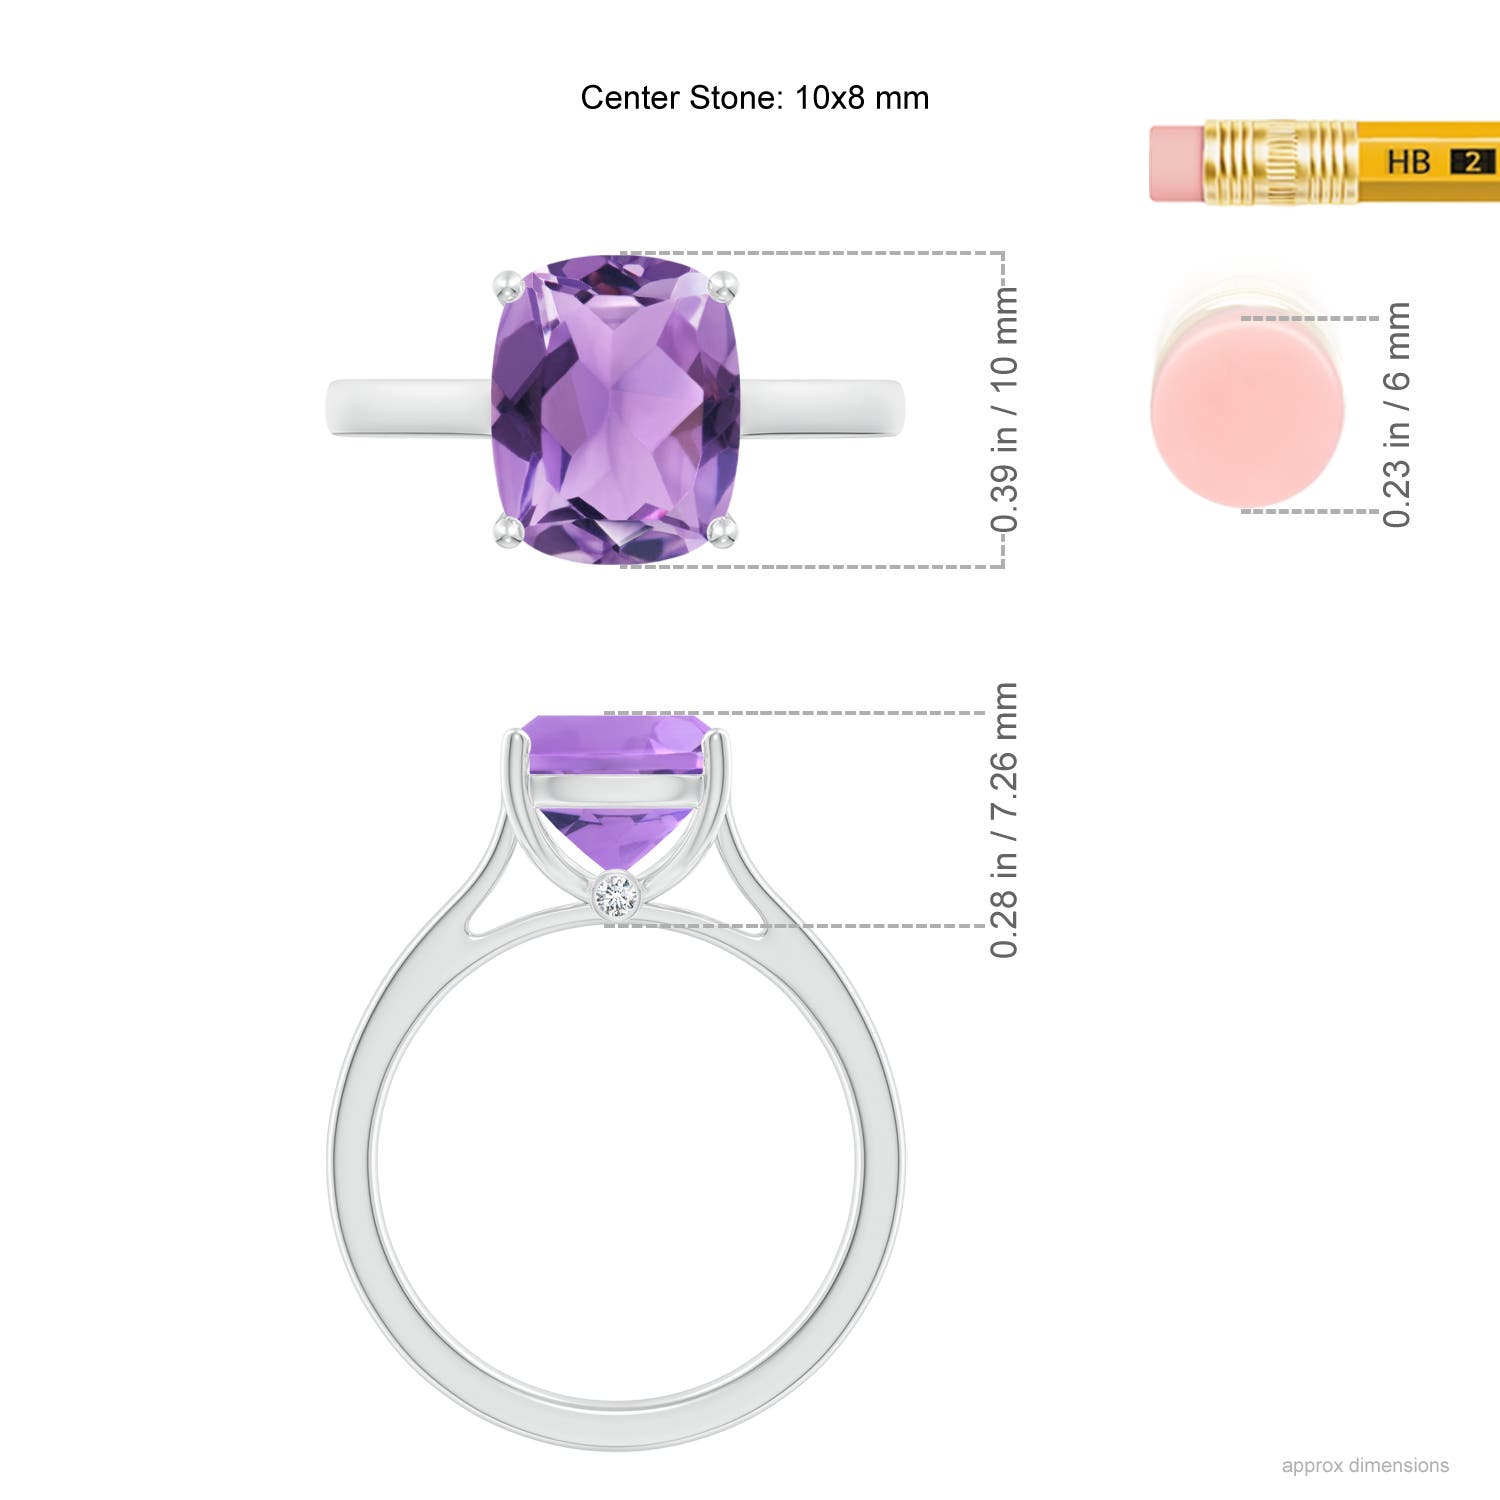 A - Amethyst / 2.72 CT / 14 KT White Gold